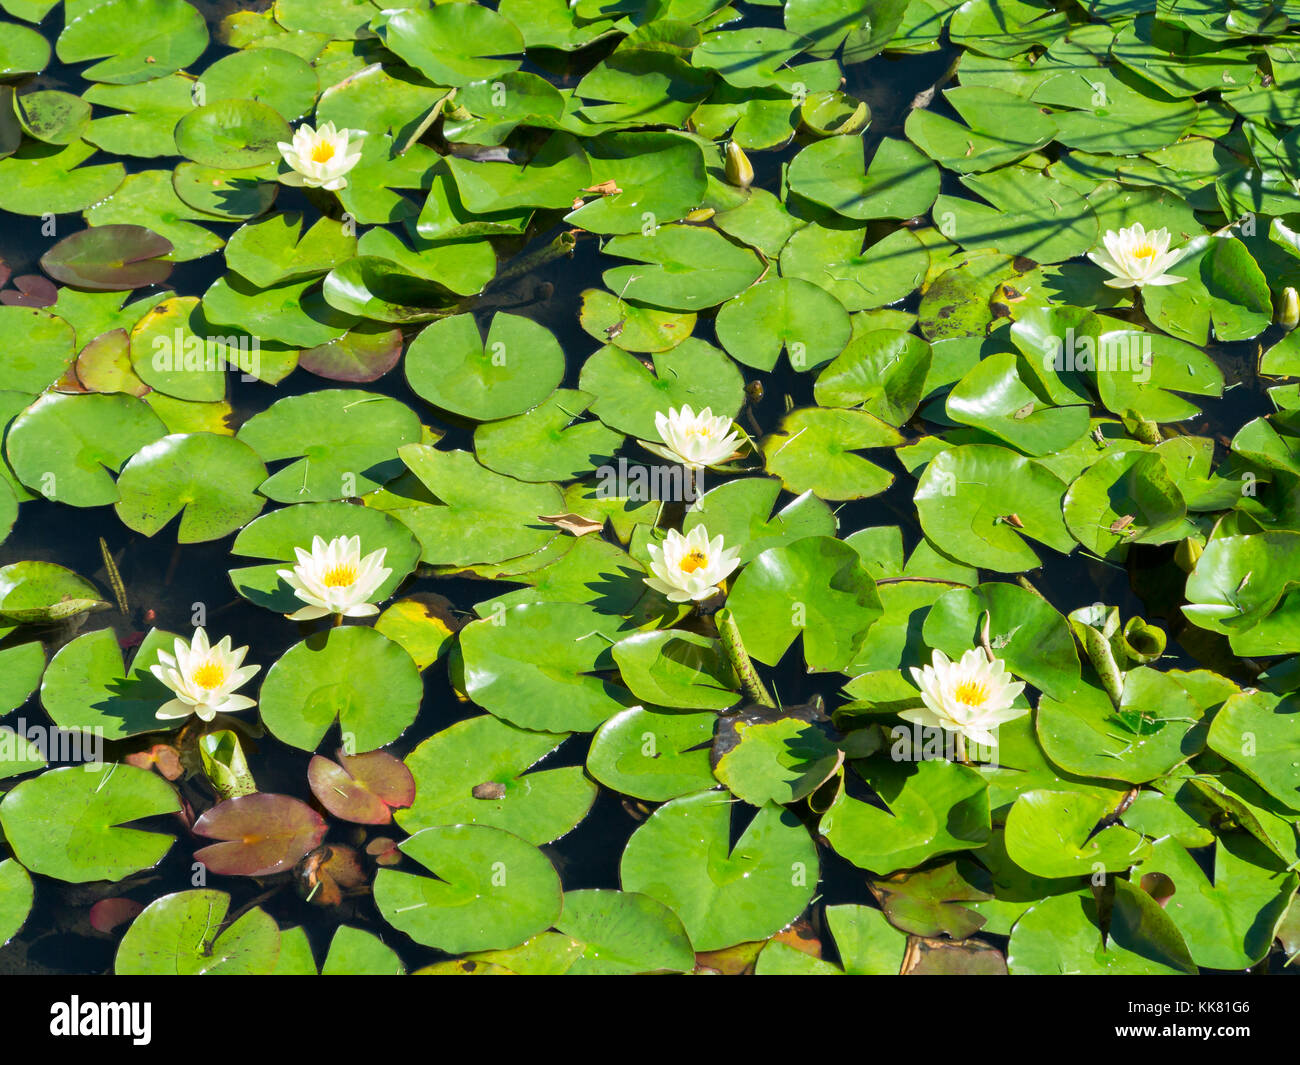 Water lilies or lotus flowers, Riccione, Italy Stock Photo